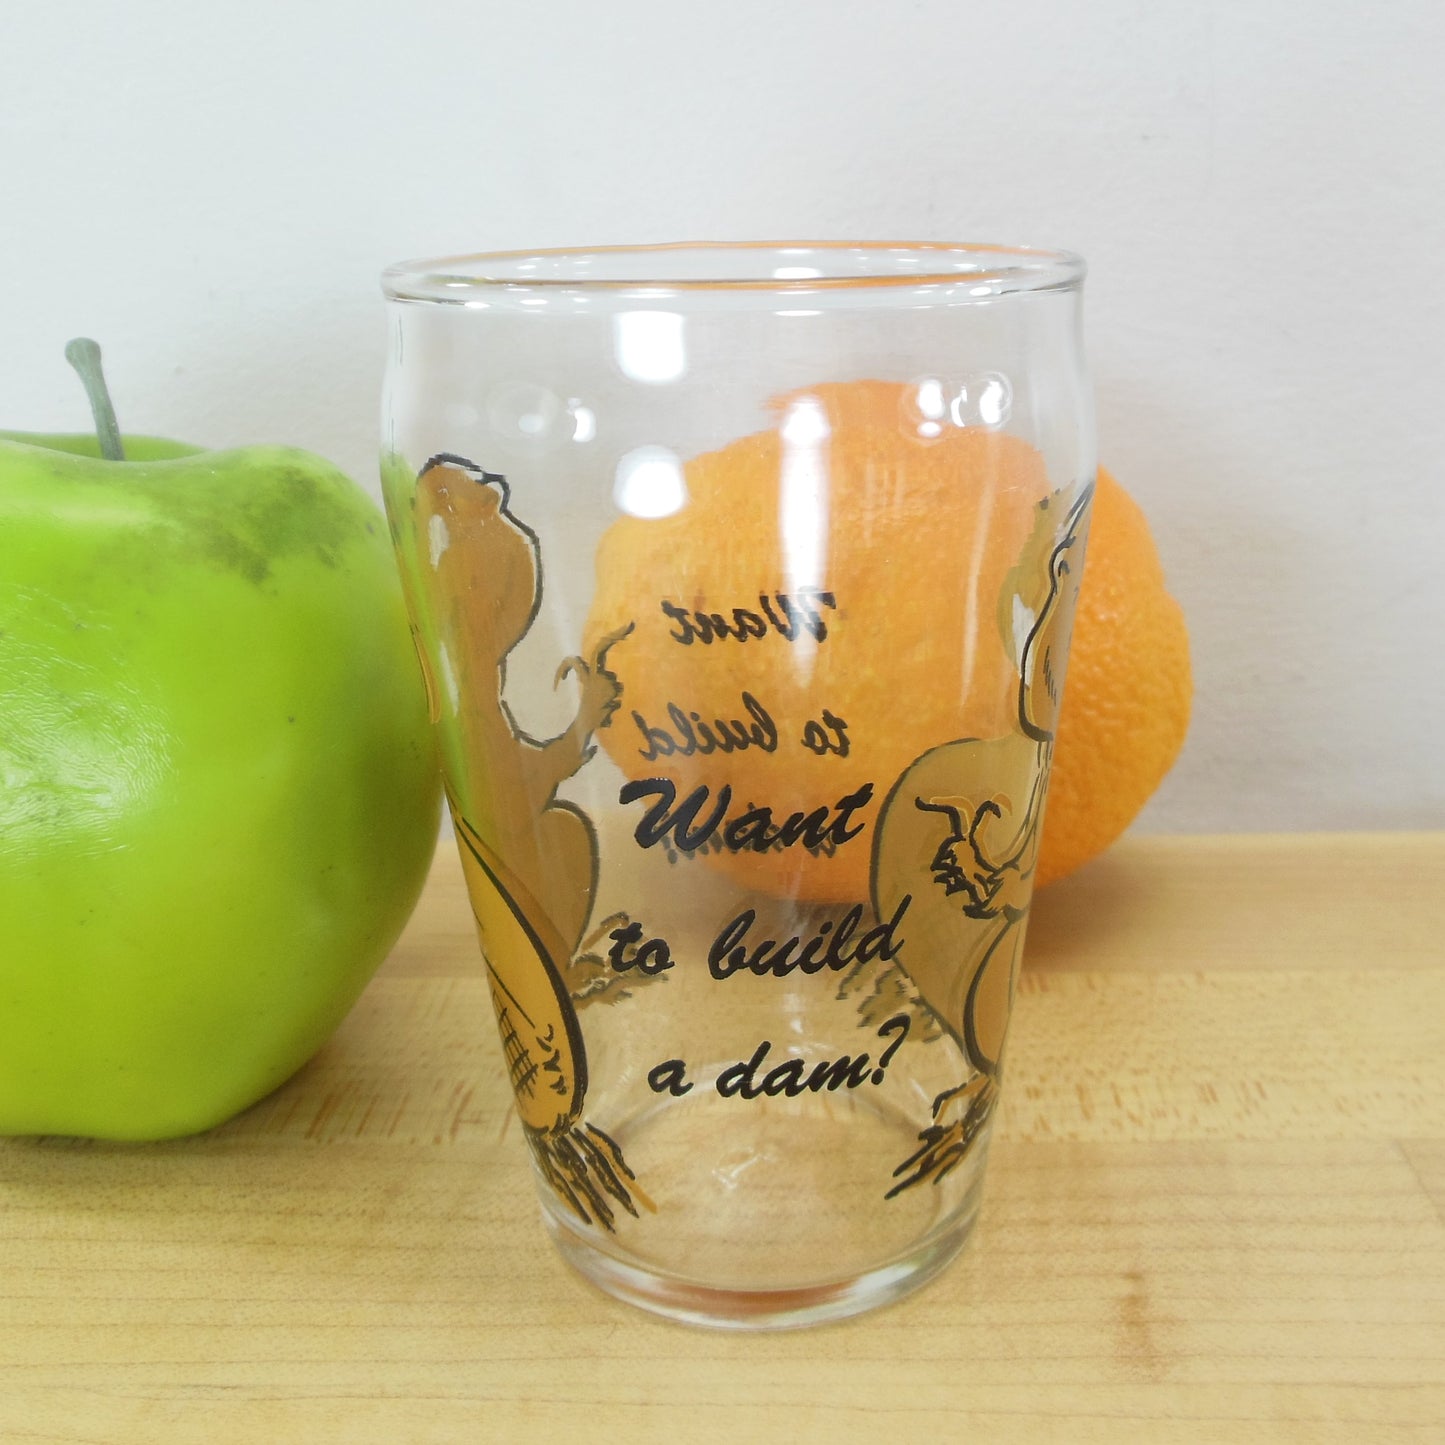 Beaver "Want to build a dam?" Juice Jelly Drink Glass Swanky Swig Vintage